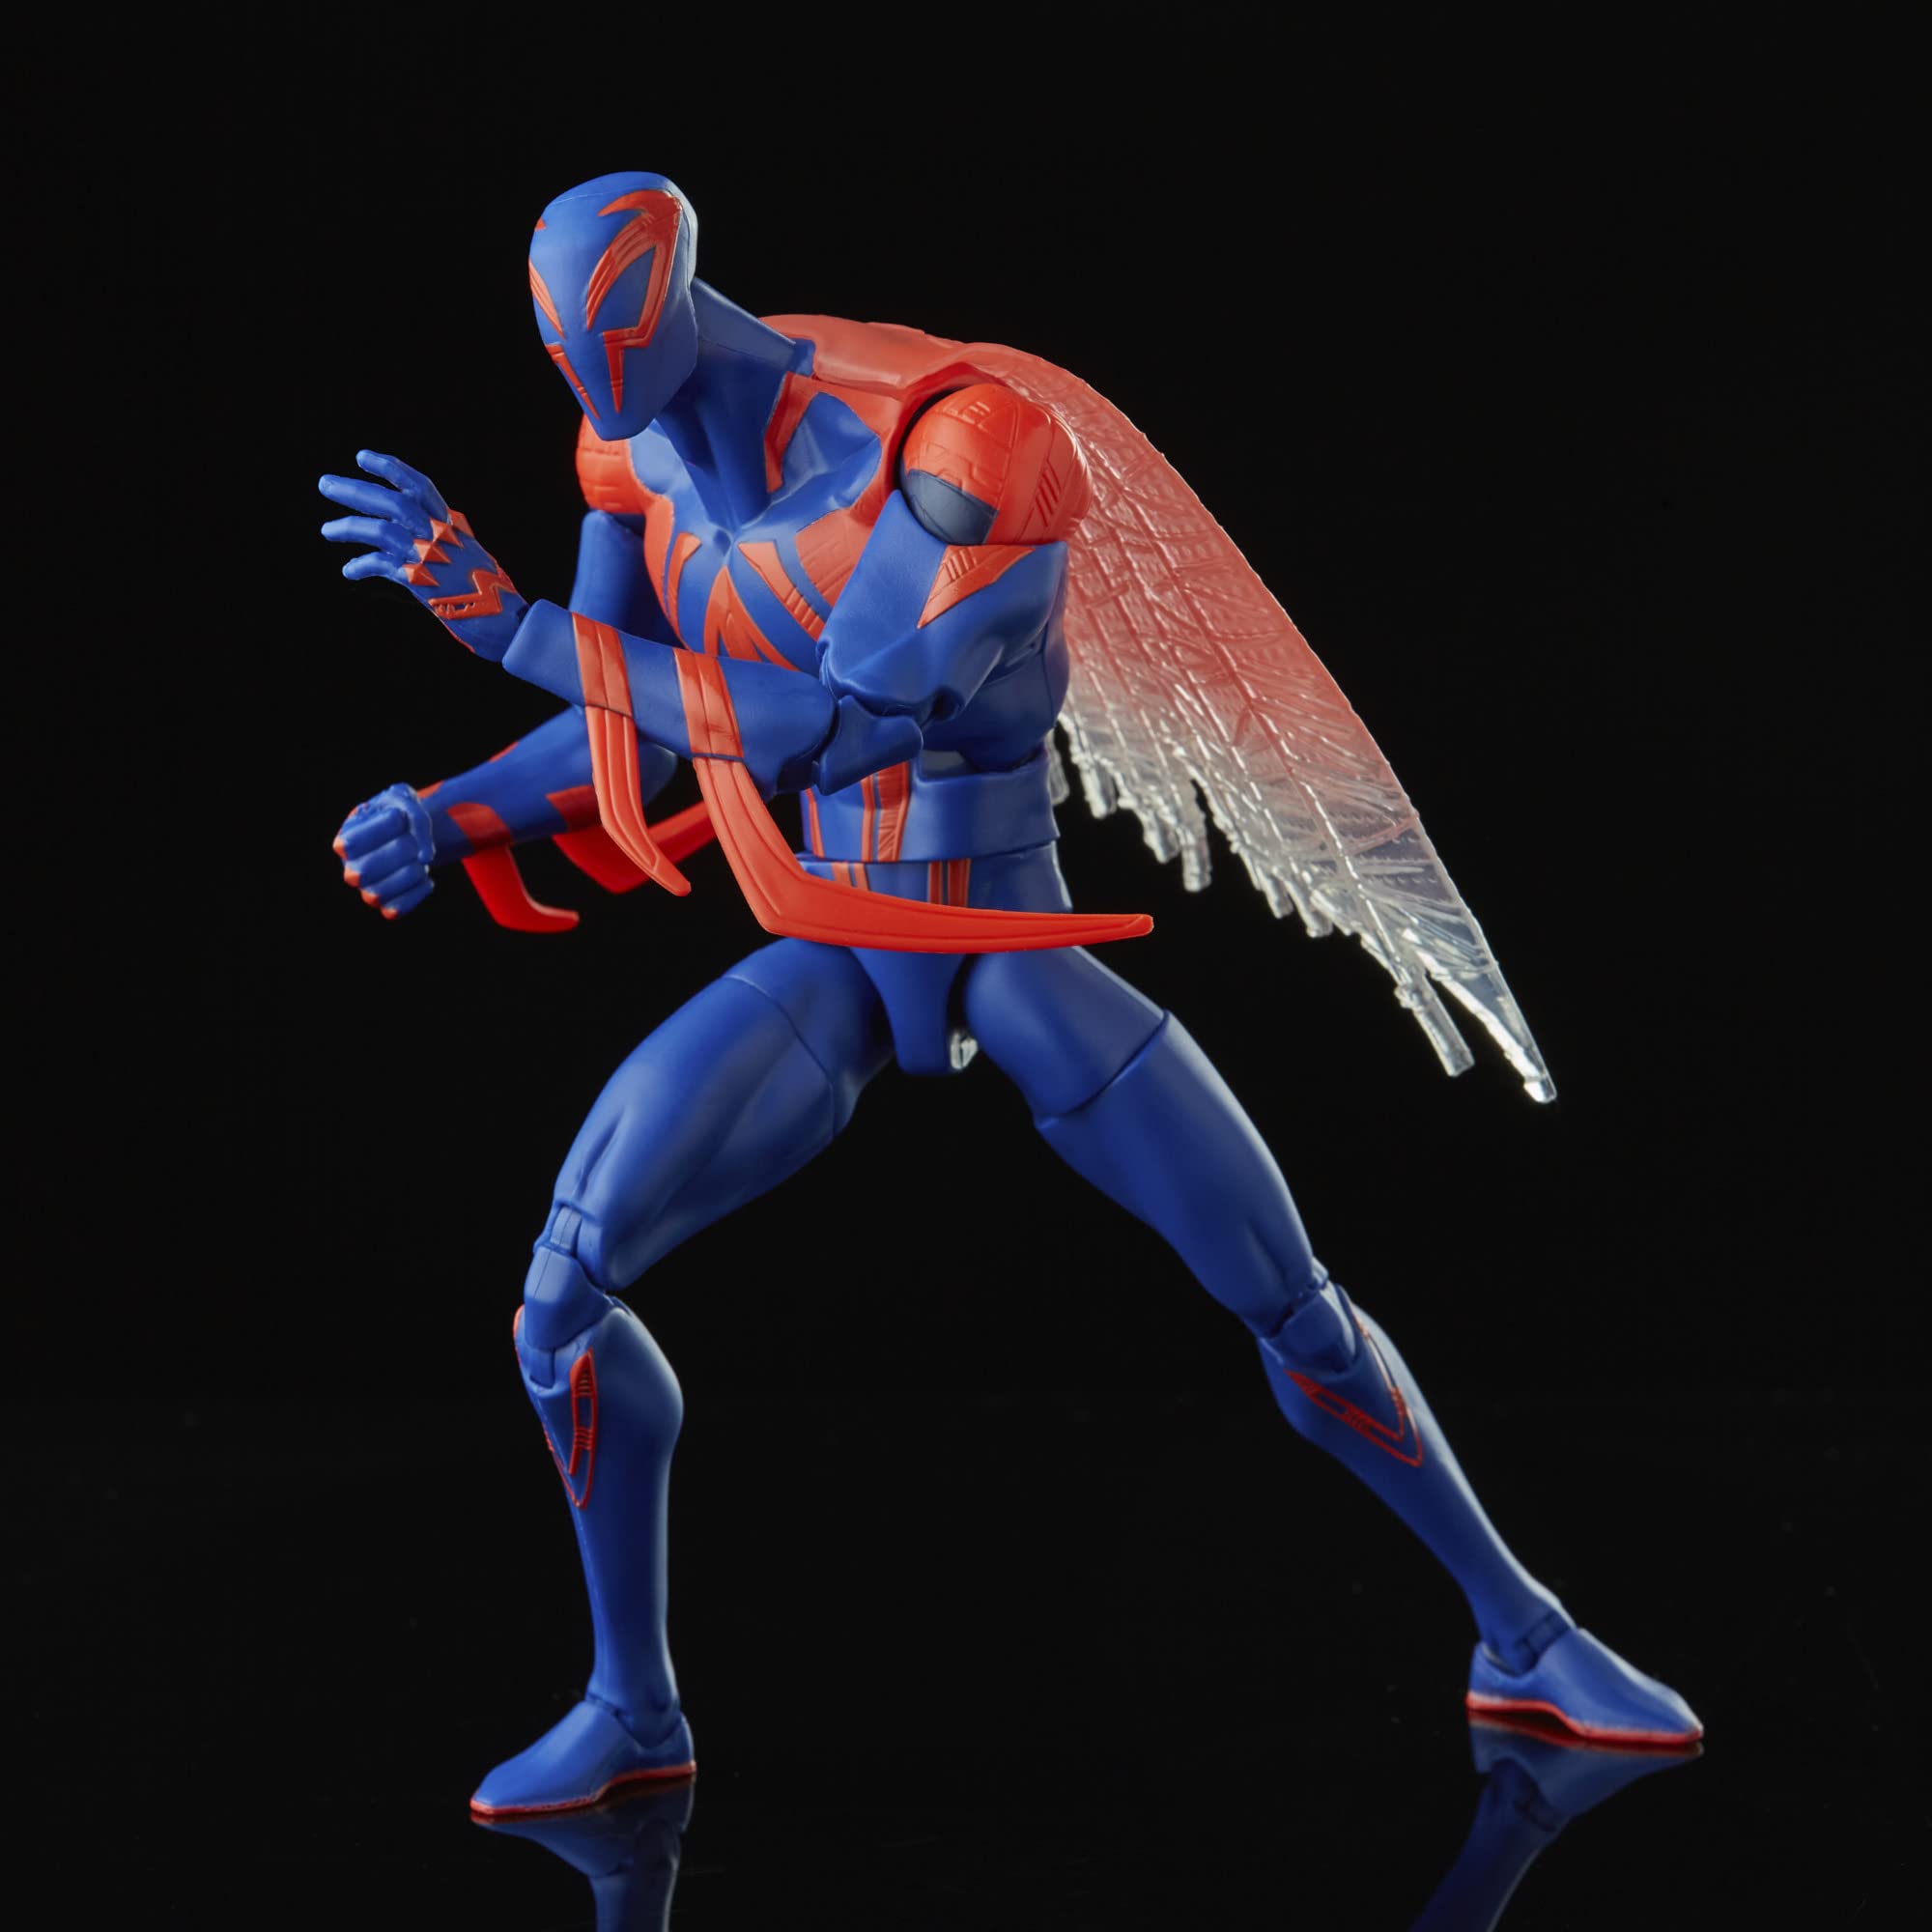 Spider-Man Marvel Legends Series Across The Spider-Verse 2099 6-inch Action Figure Toy, 2 Accessories